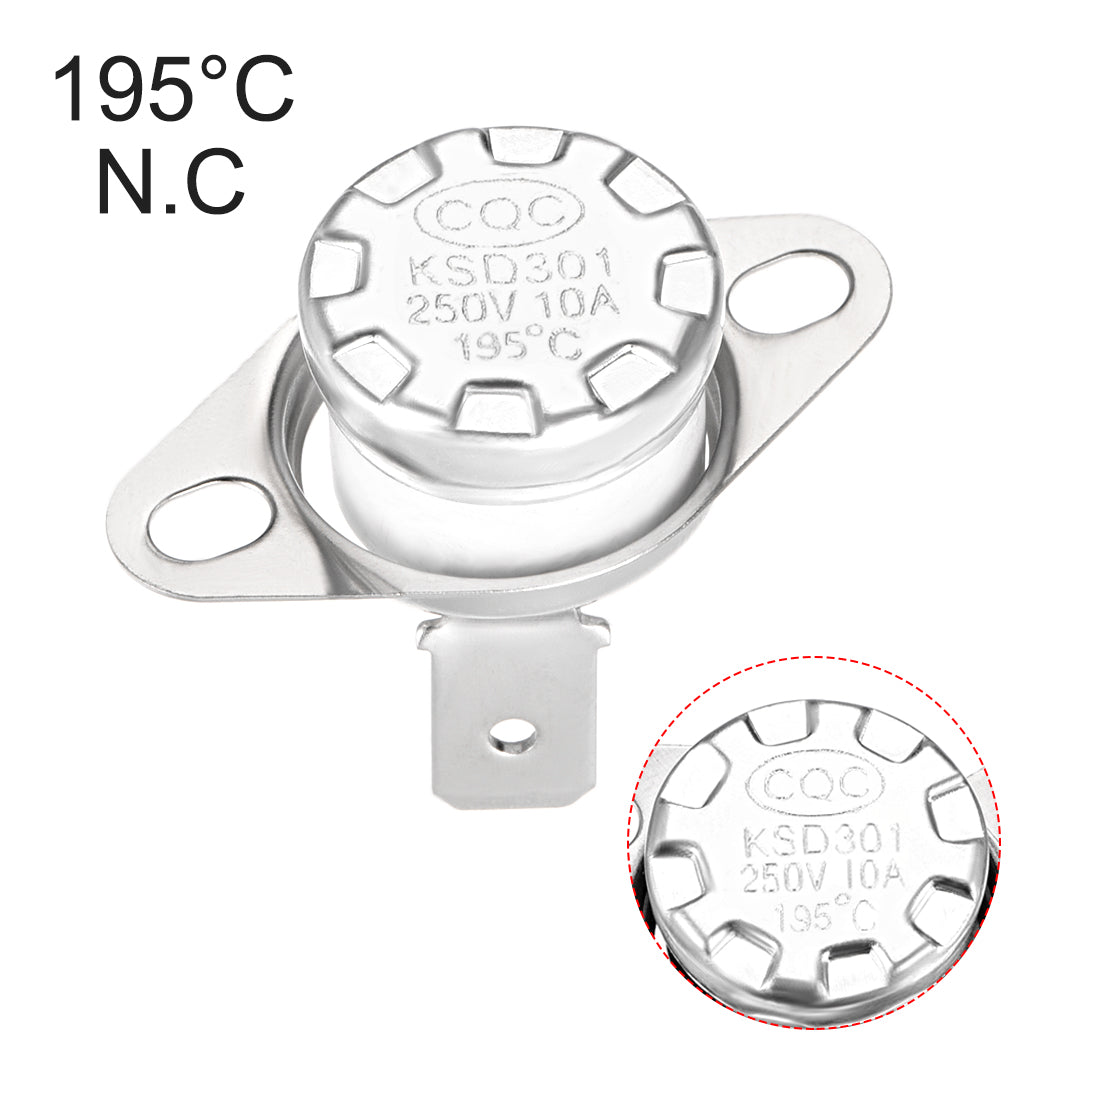 uxcell Uxcell Temperature Control Switch , Thermostat , KSD301 195°C , 10A , Normally Closed N.C 2pcs